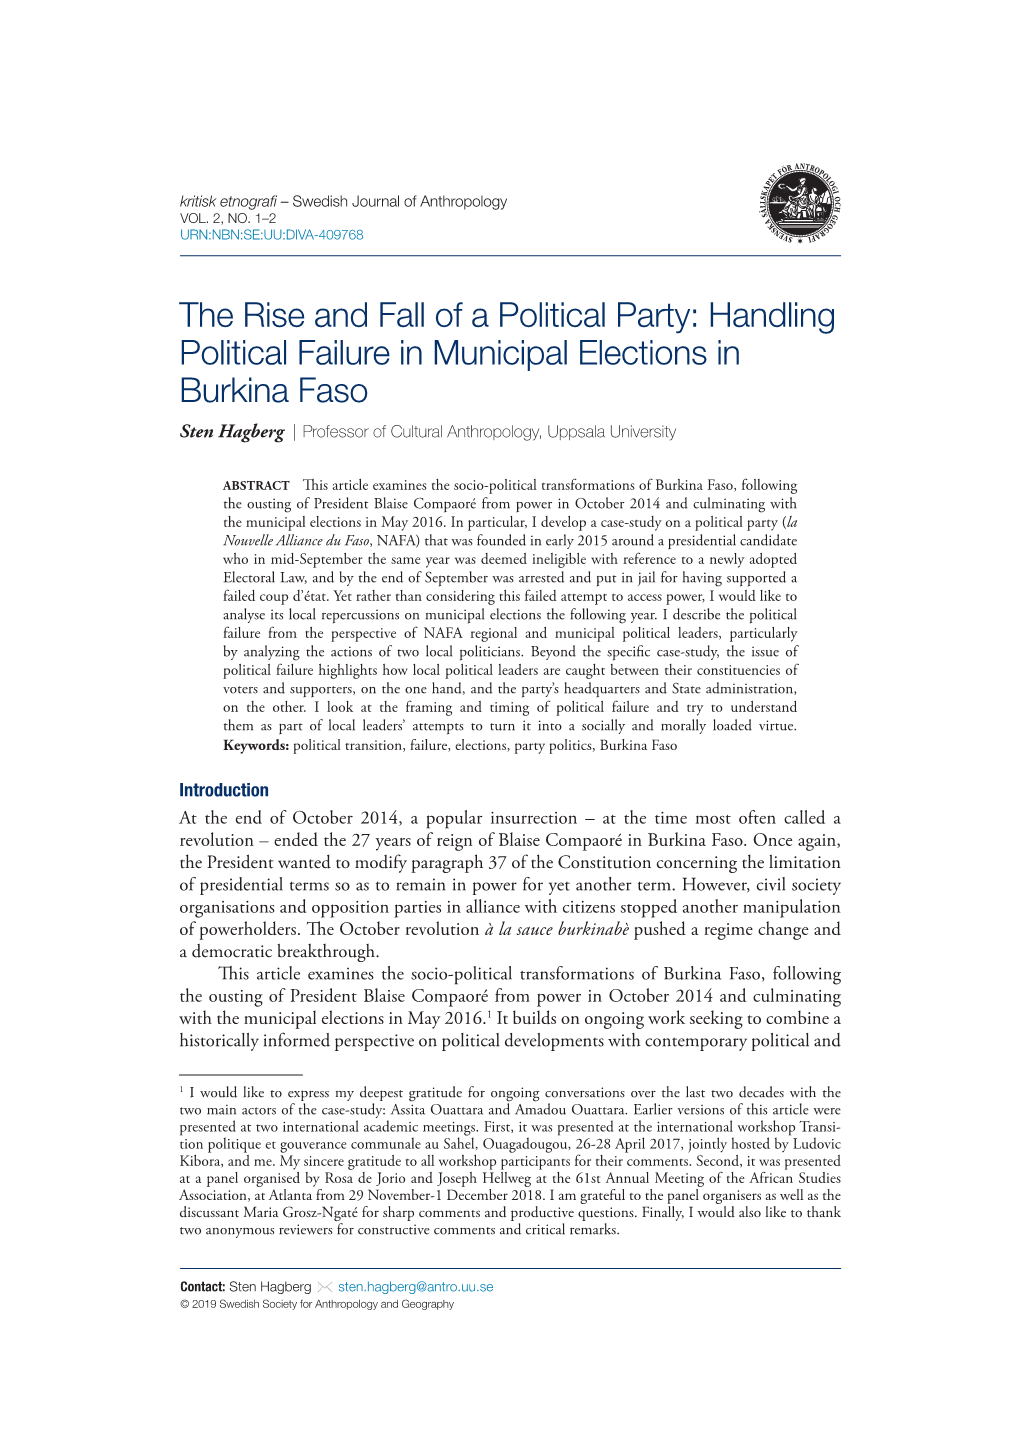 The Rise and Fall of a Political Party: Handling Political Failure In